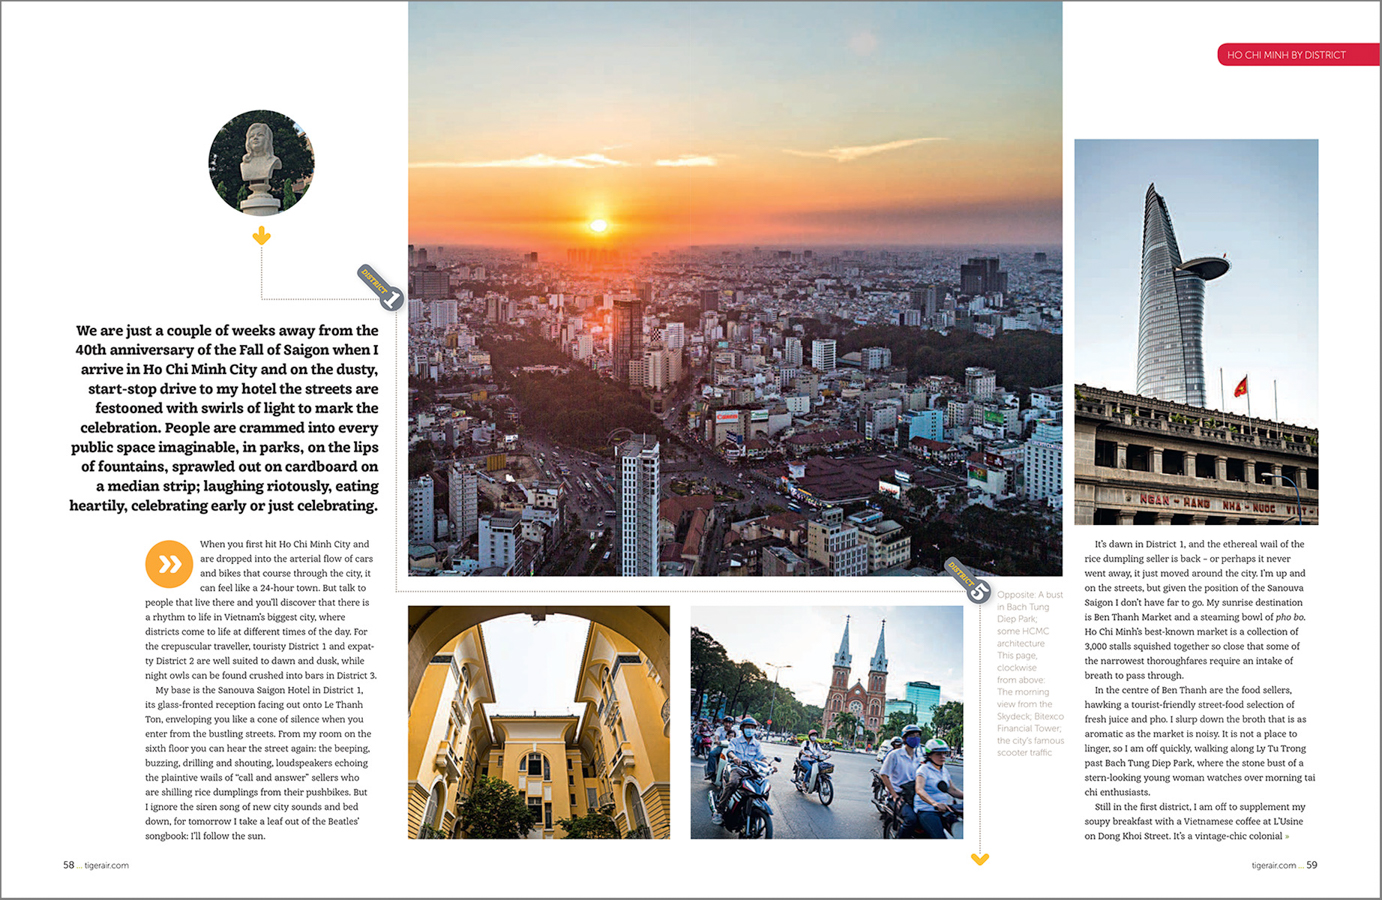 A travel feature on Vietnam's southern metropolis.